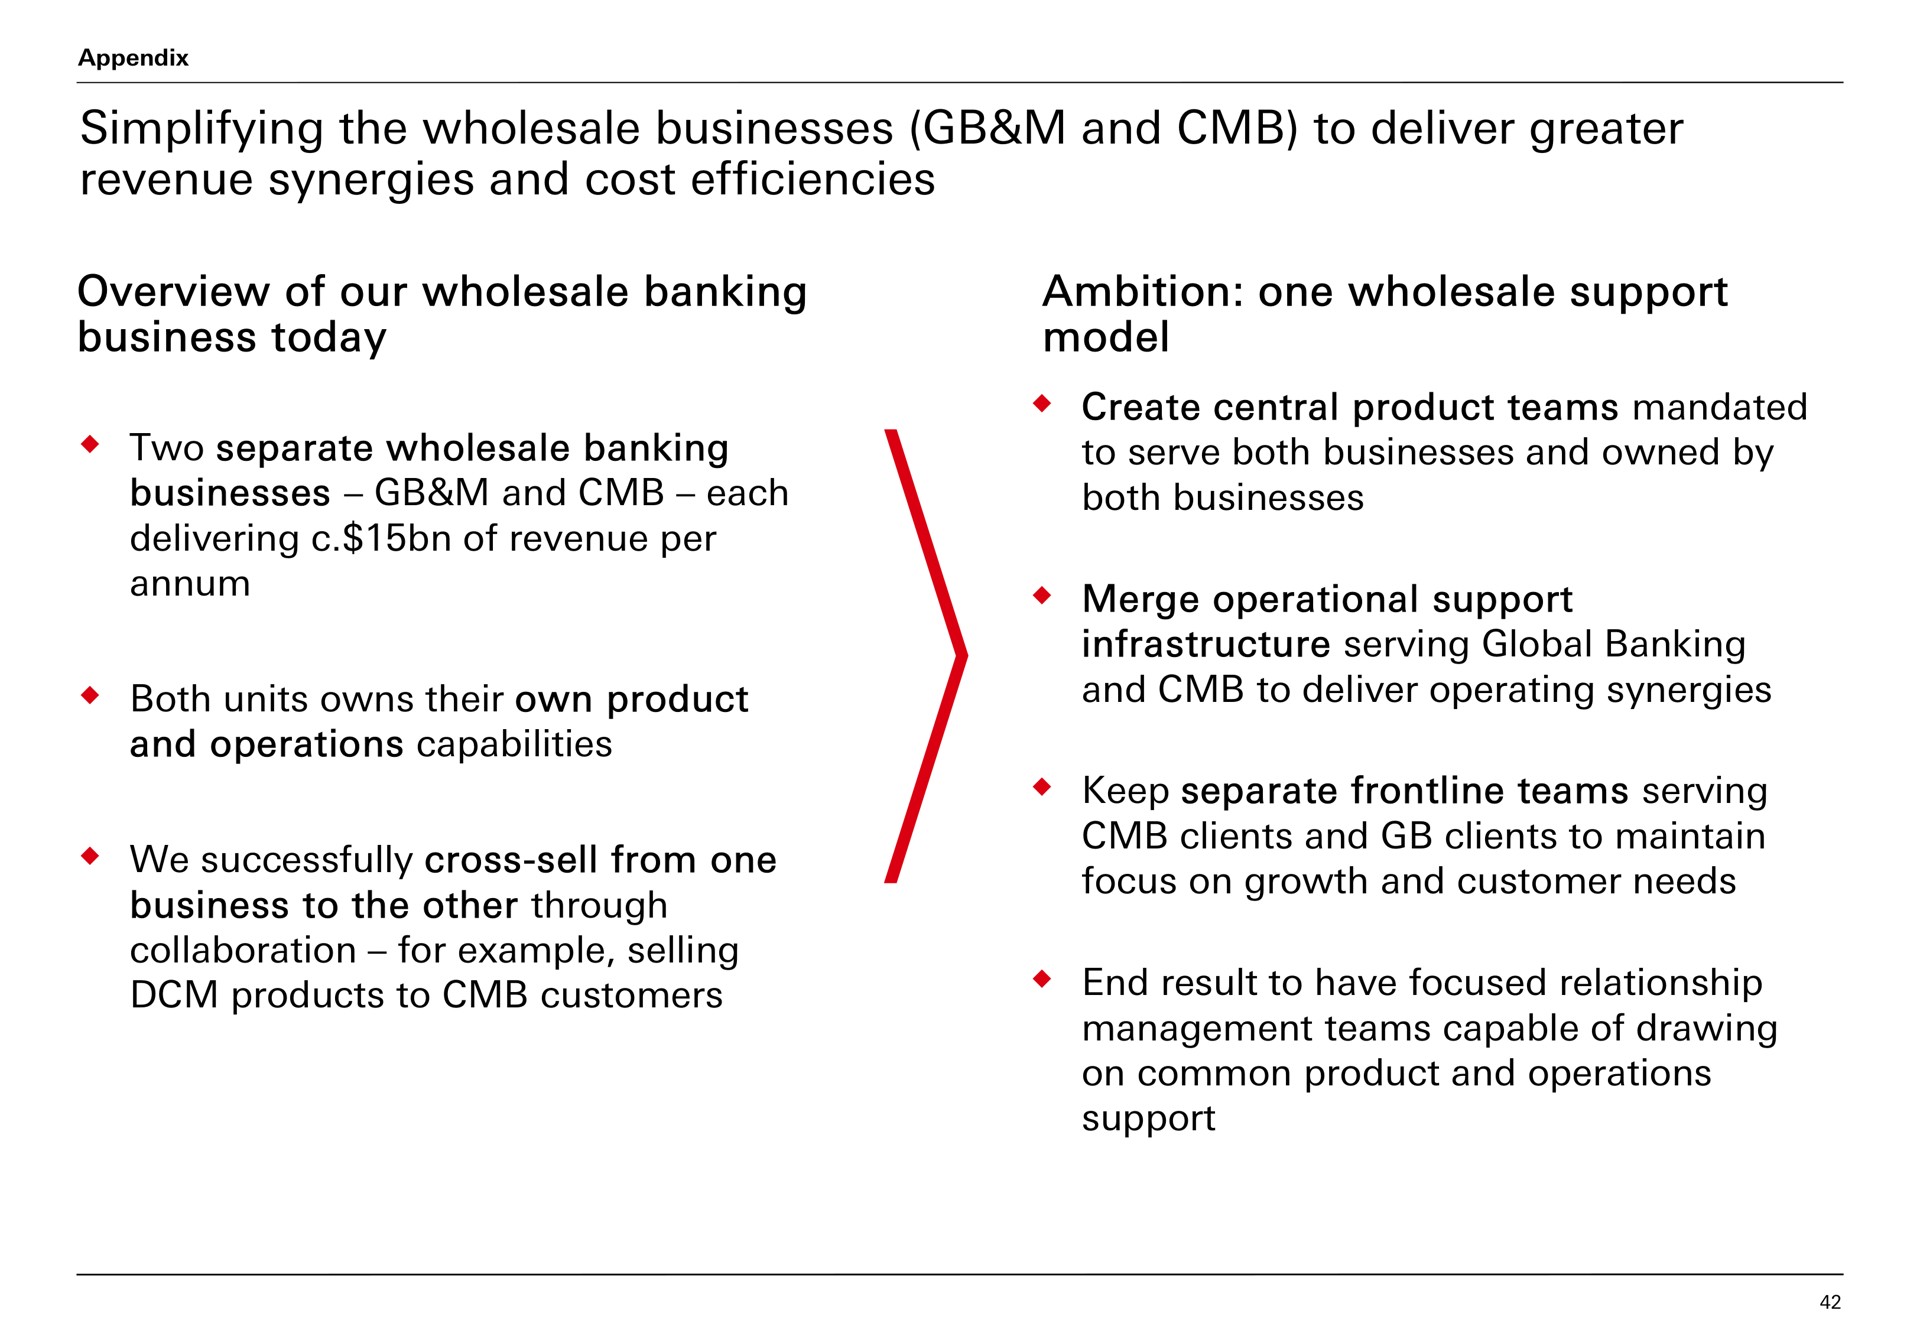 simplifying the wholesale businesses and to deliver greater revenue synergies and cost efficiencies overview of our wholesale banking business today ambition one wholesale support model both units owns their own product products customers operating end result have focused relationship | HSBC